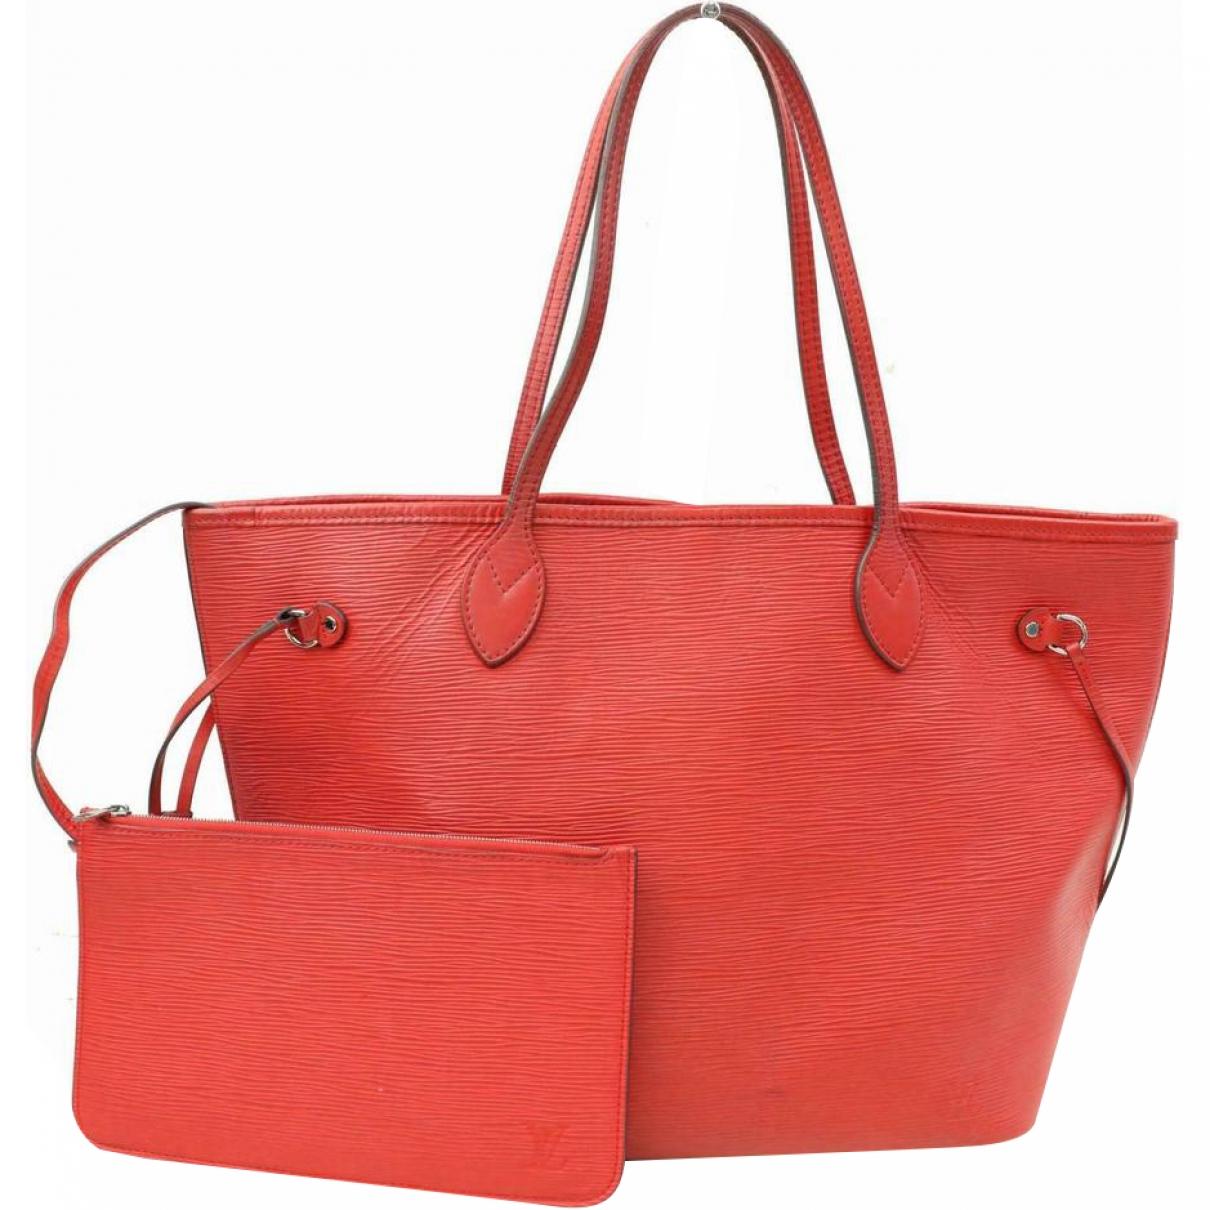 Louis Vuitton Neverfull Leather Tote in Red - Lyst